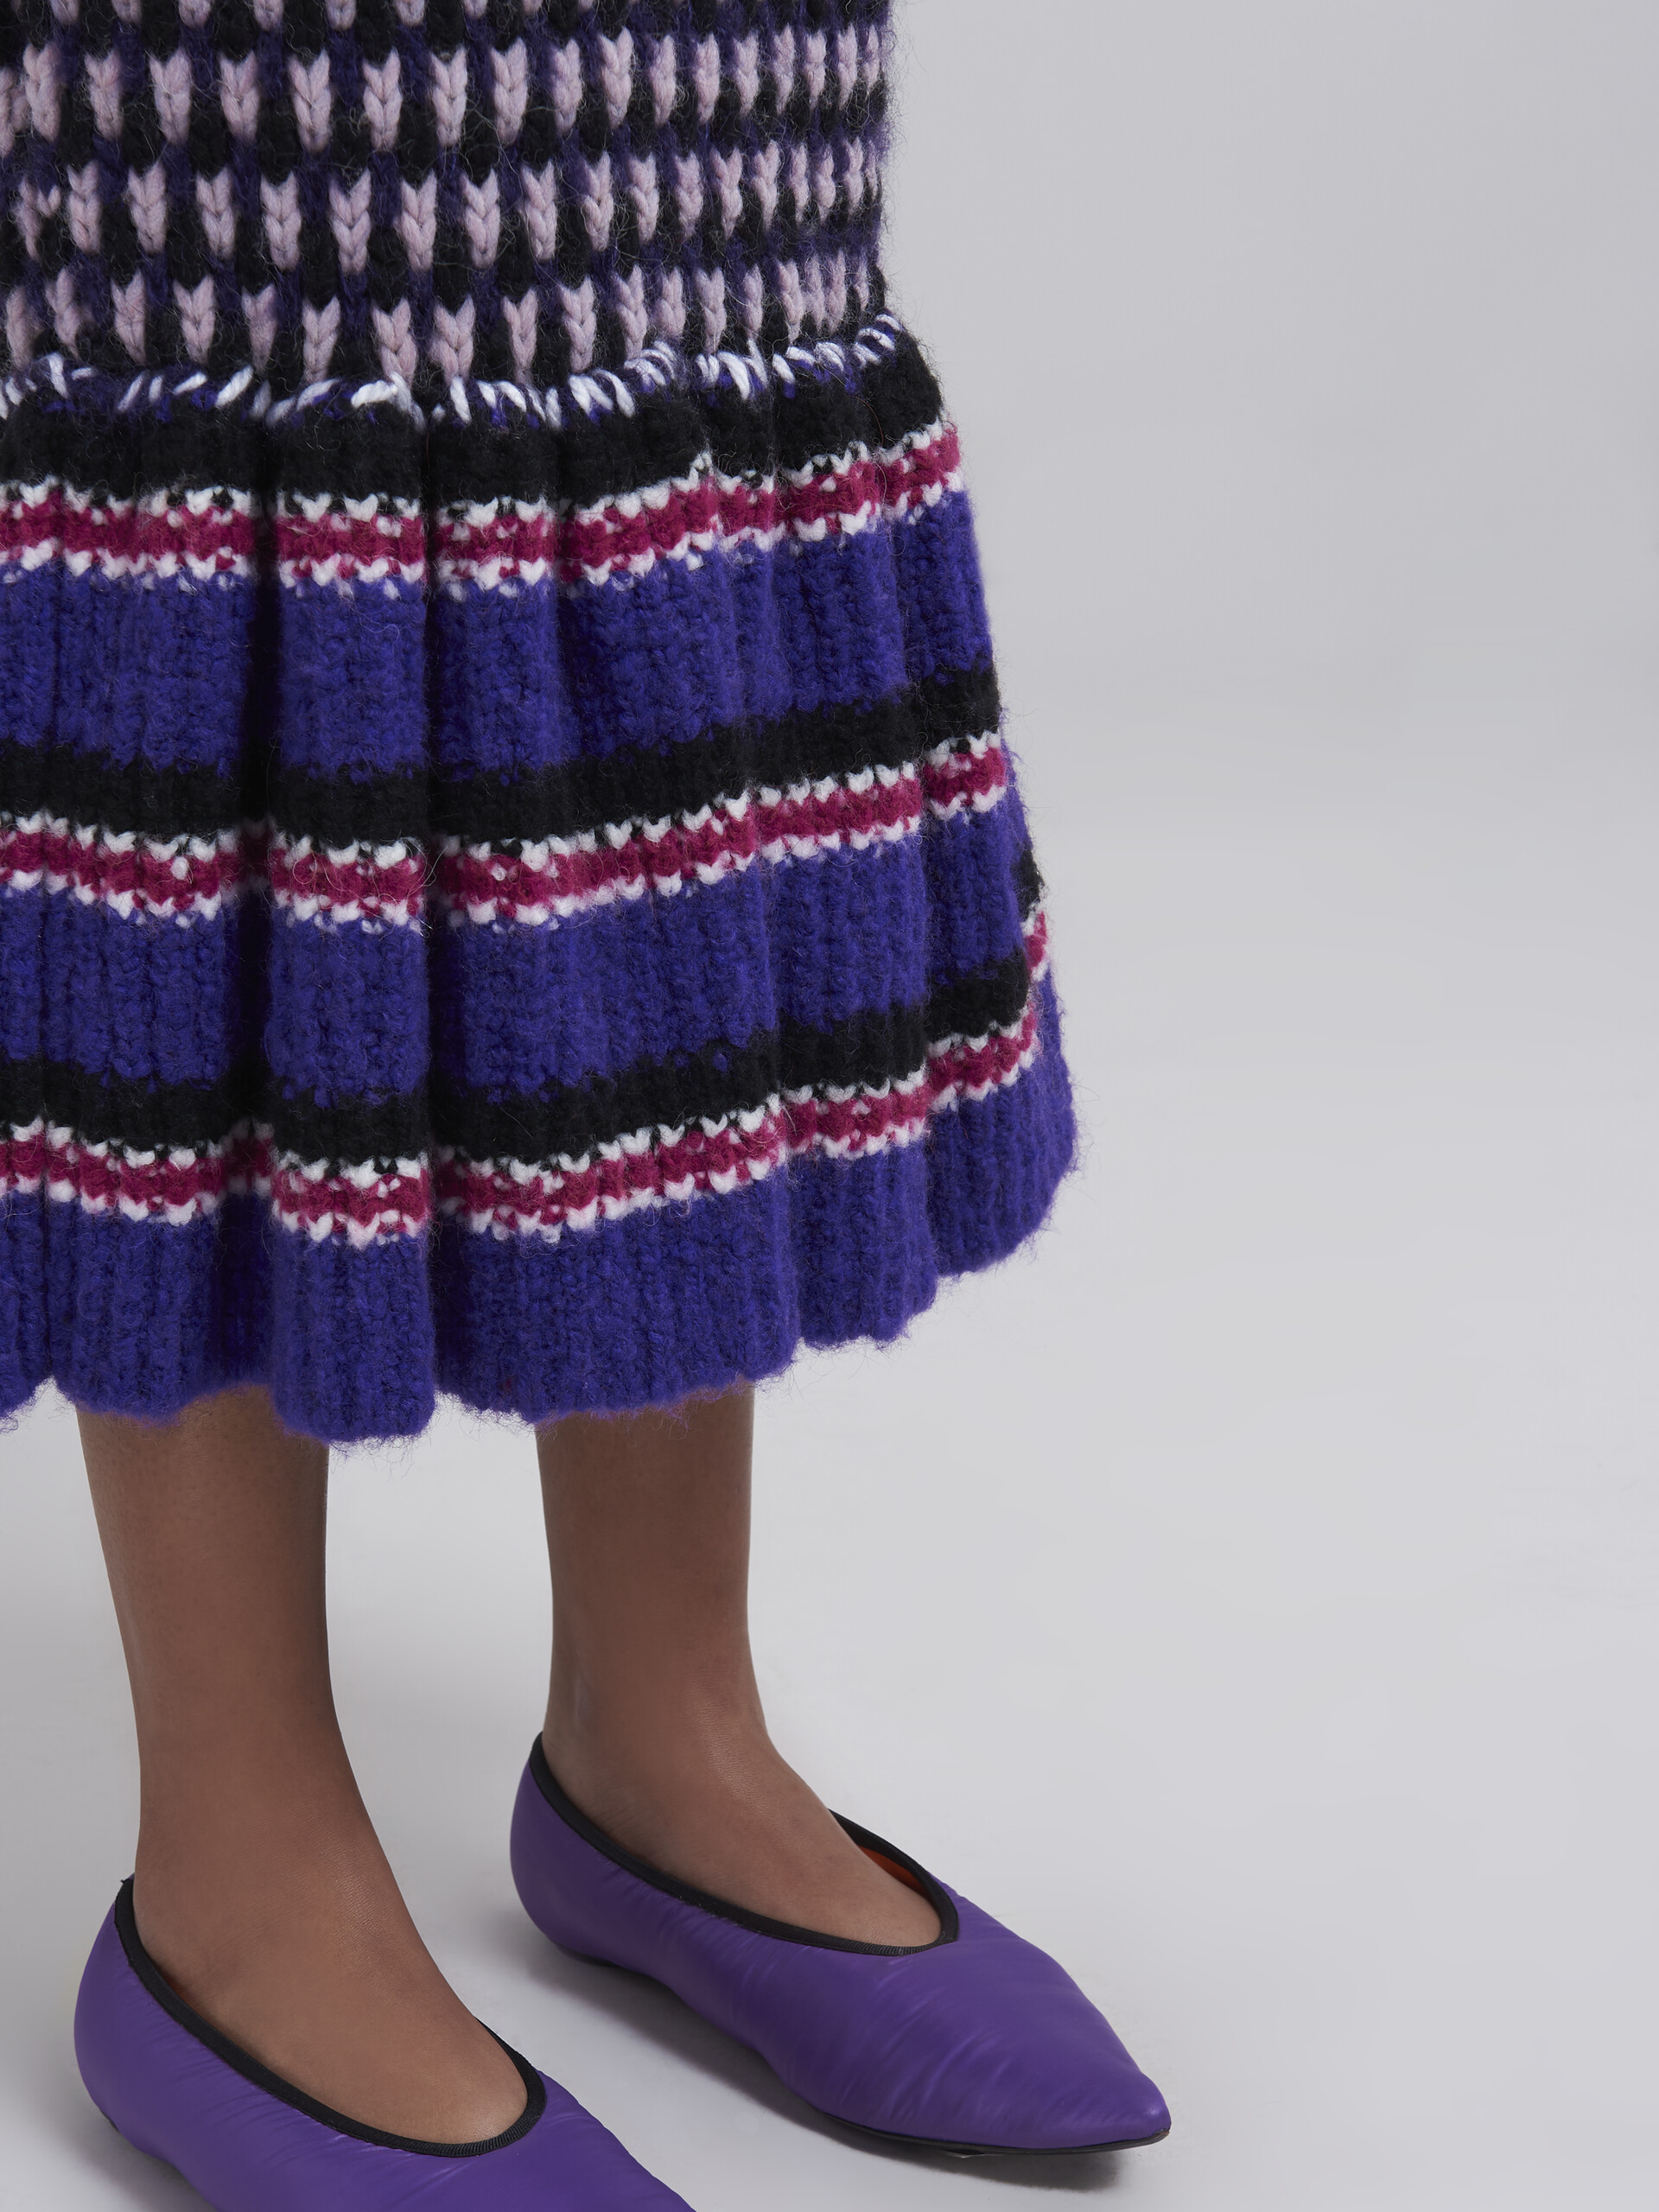 3D-stitch skirt in blended yarns - Skirts - Image 4